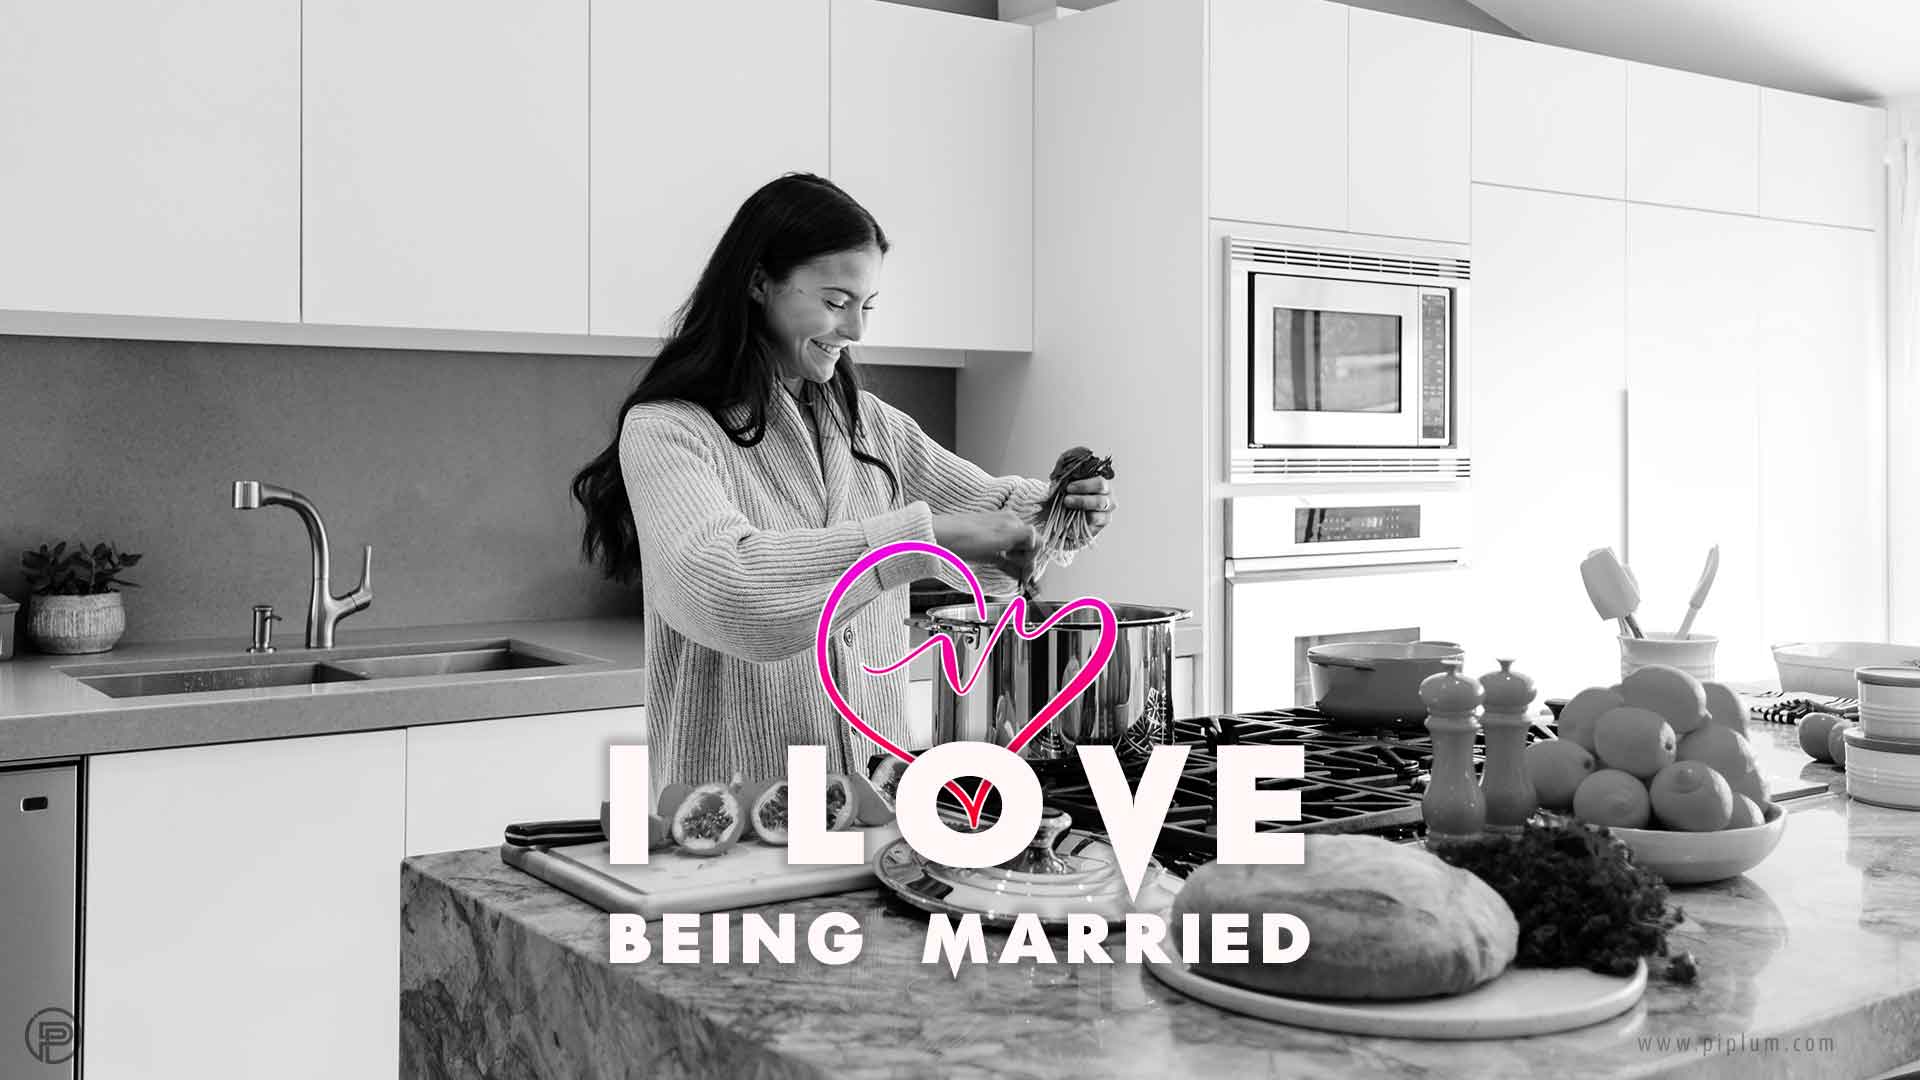 I-love-being-married-quote-kitchen